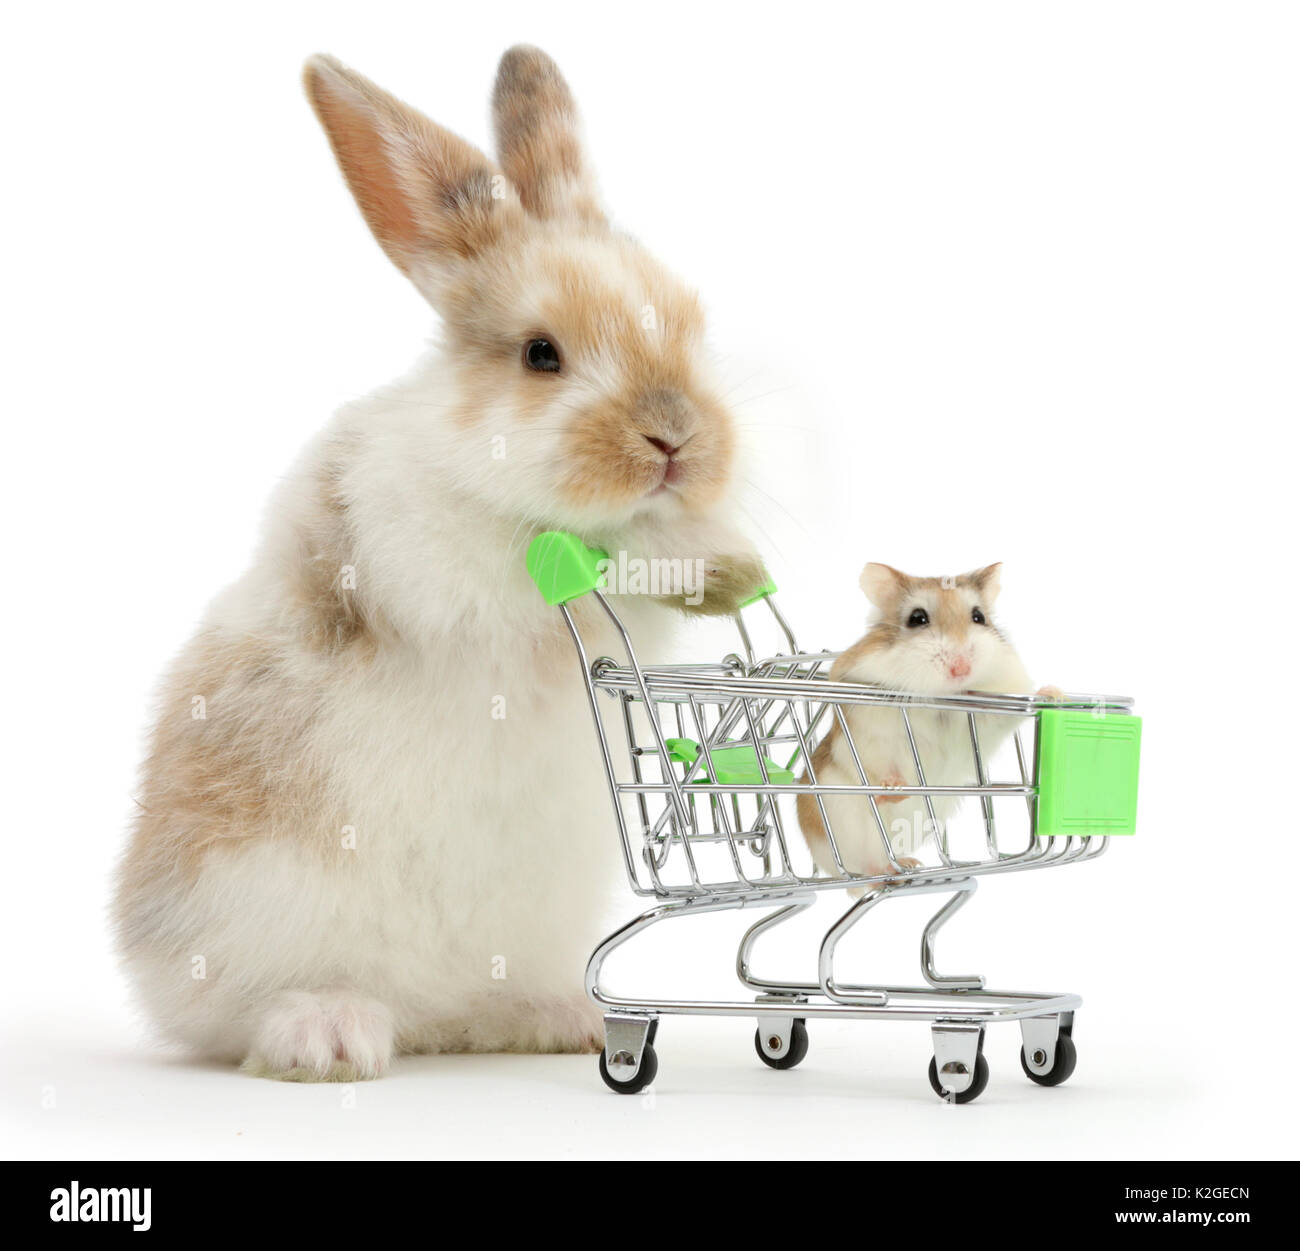 Young Rabbit with Roborovski hamster in shopping trolley Stock Photo - Alamy